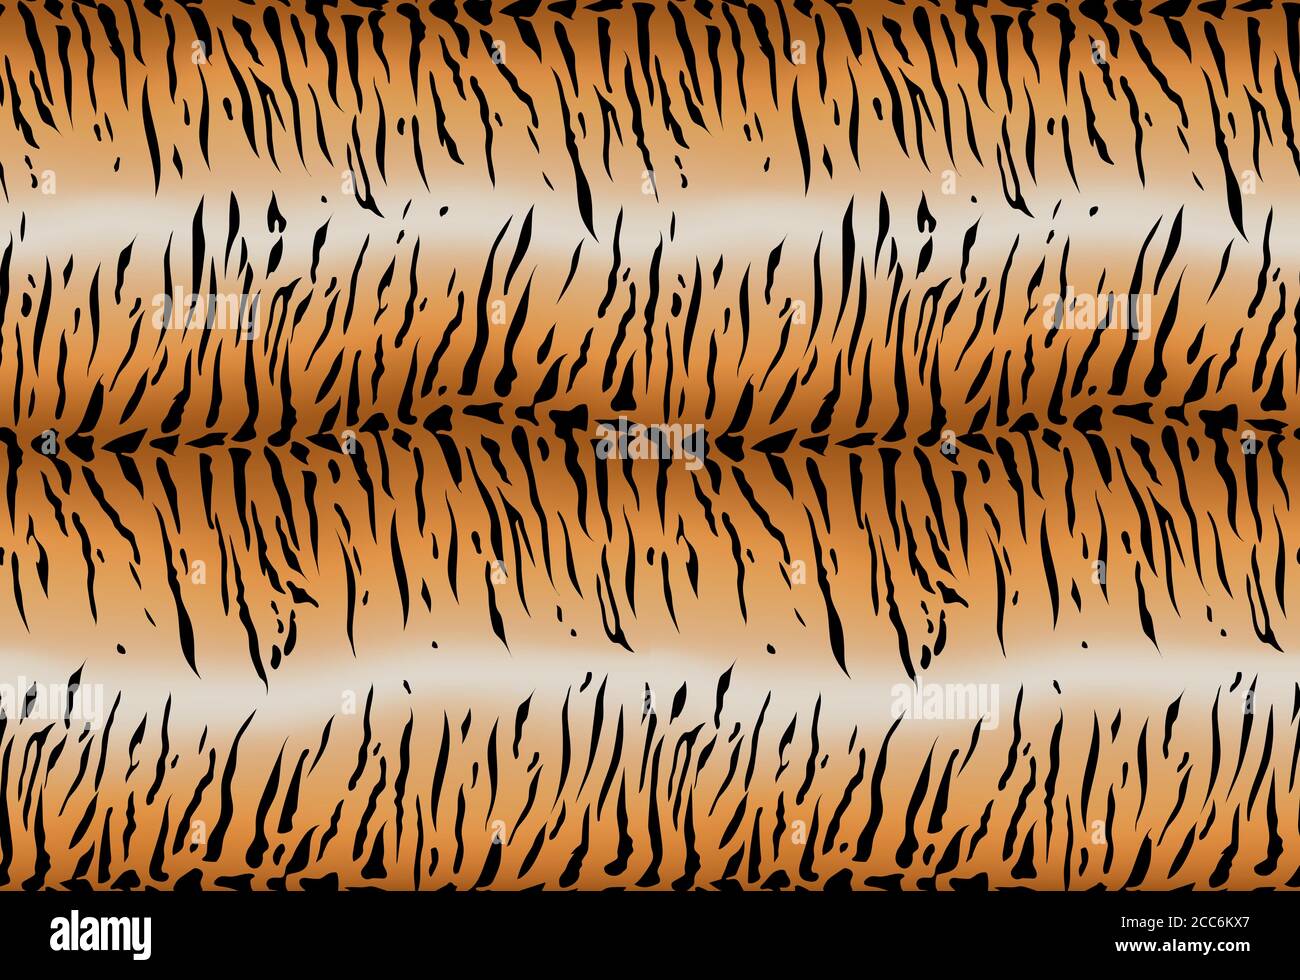 Tiger fur pattern. Tiger skin striped seamless vector. Animal print. Faux black lines wild cat print texture. Graphic illustration background Stock Vector